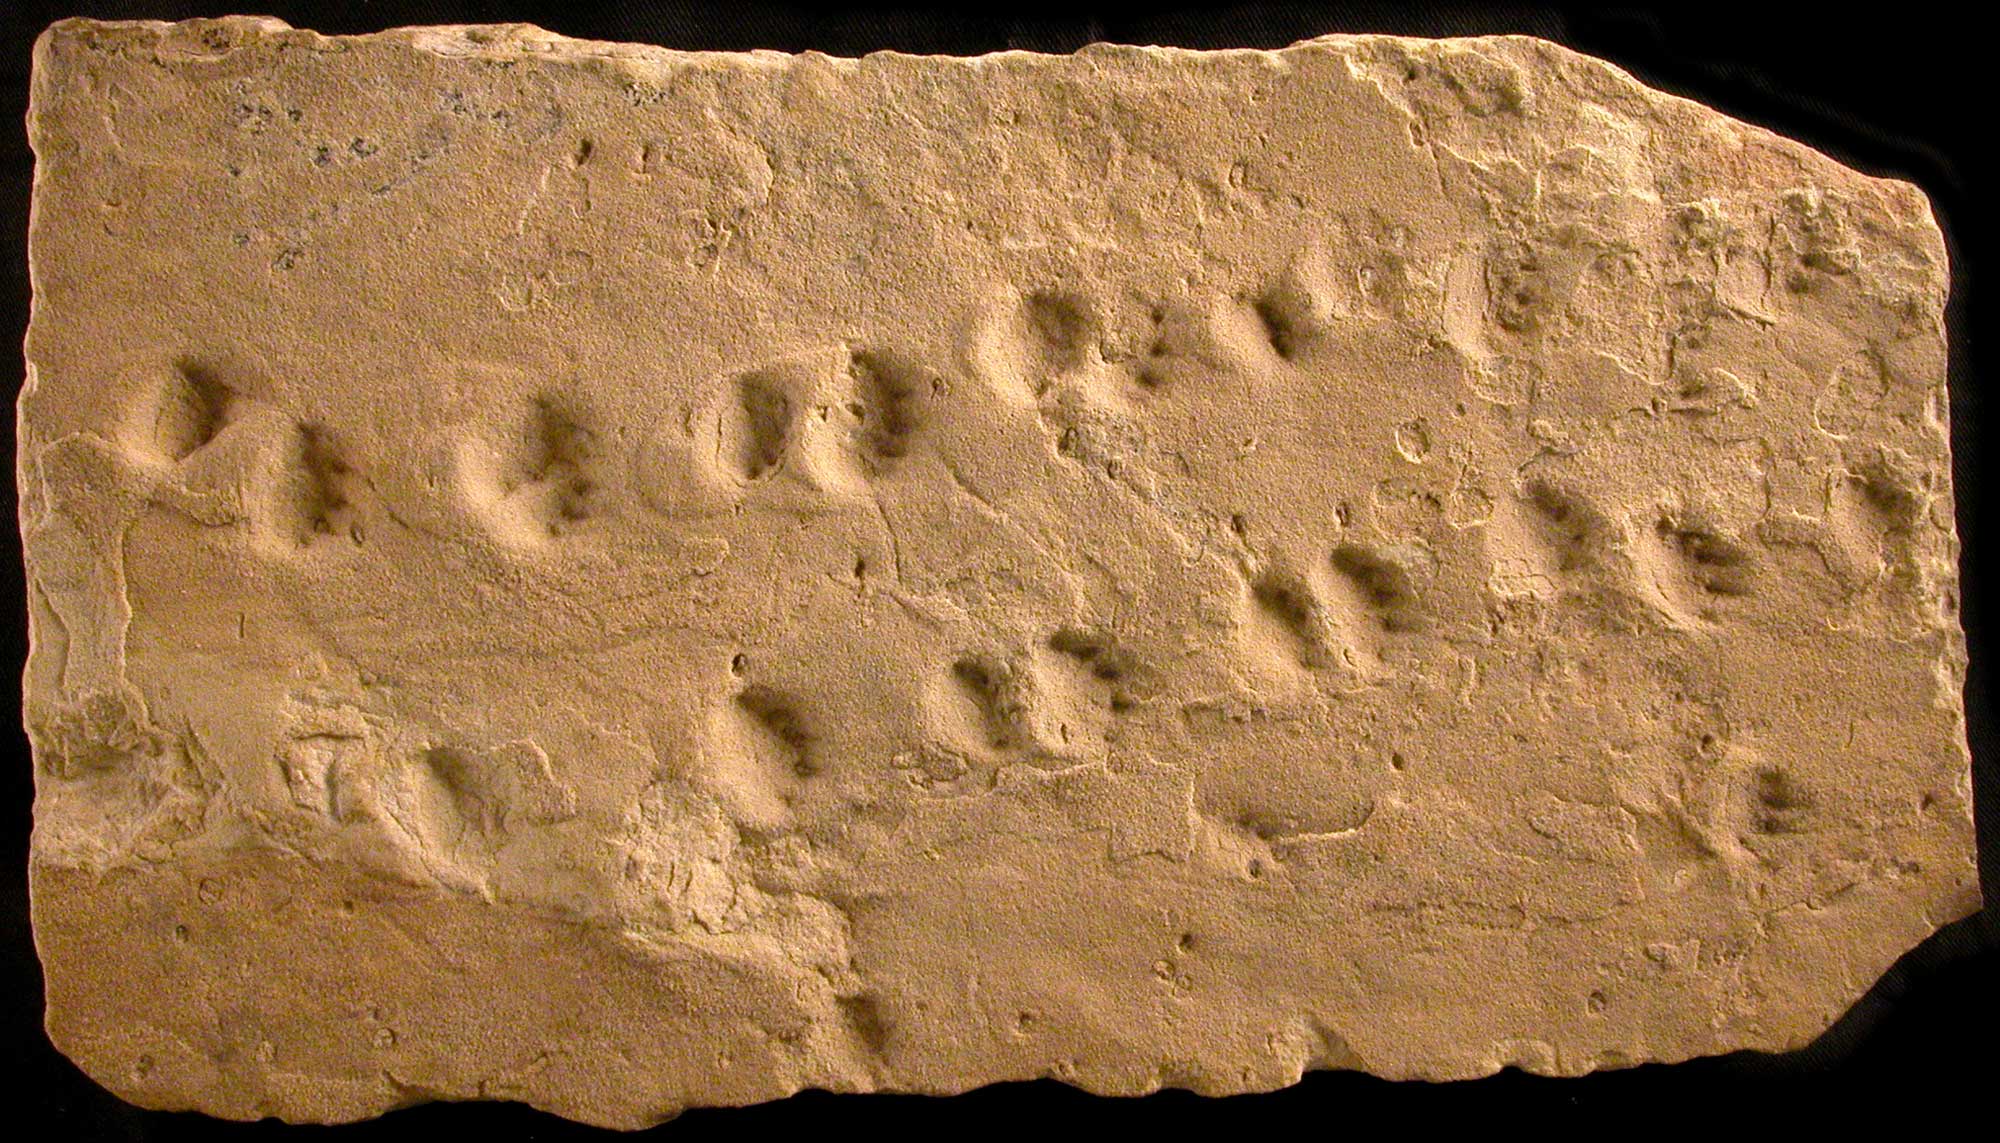 Photograph of a light brown rock slab with a vertebrate trackway. Each track is wider than long and has pointed or clawed feet.